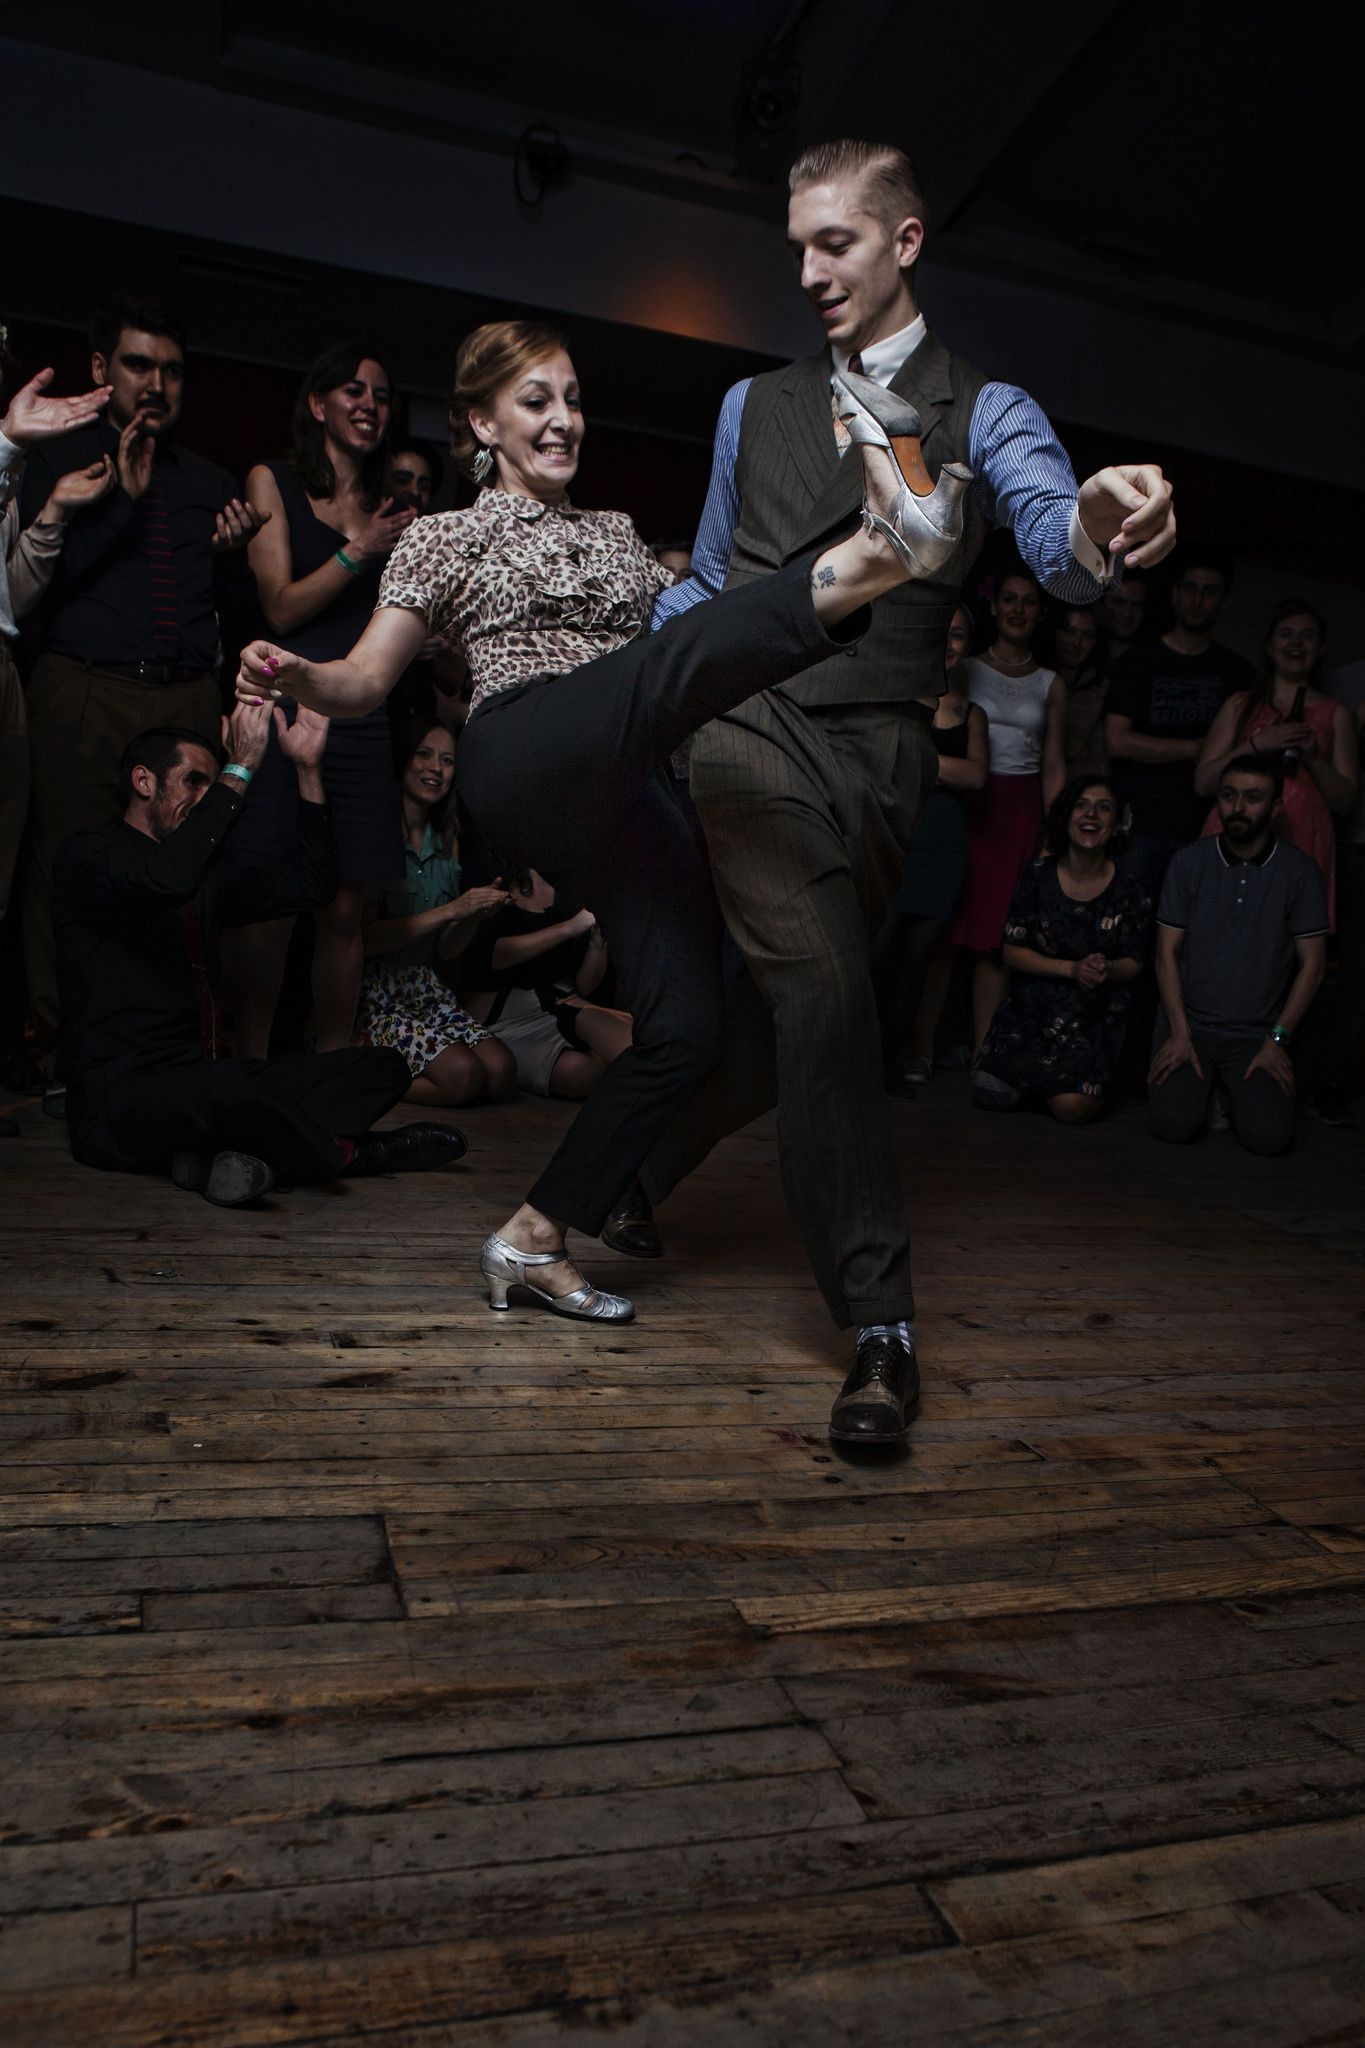 Swing Dance: Modern Dance Performance In Istanbul, Jazz Music, Special Dancing Shoes. 1370x2050 HD Wallpaper.